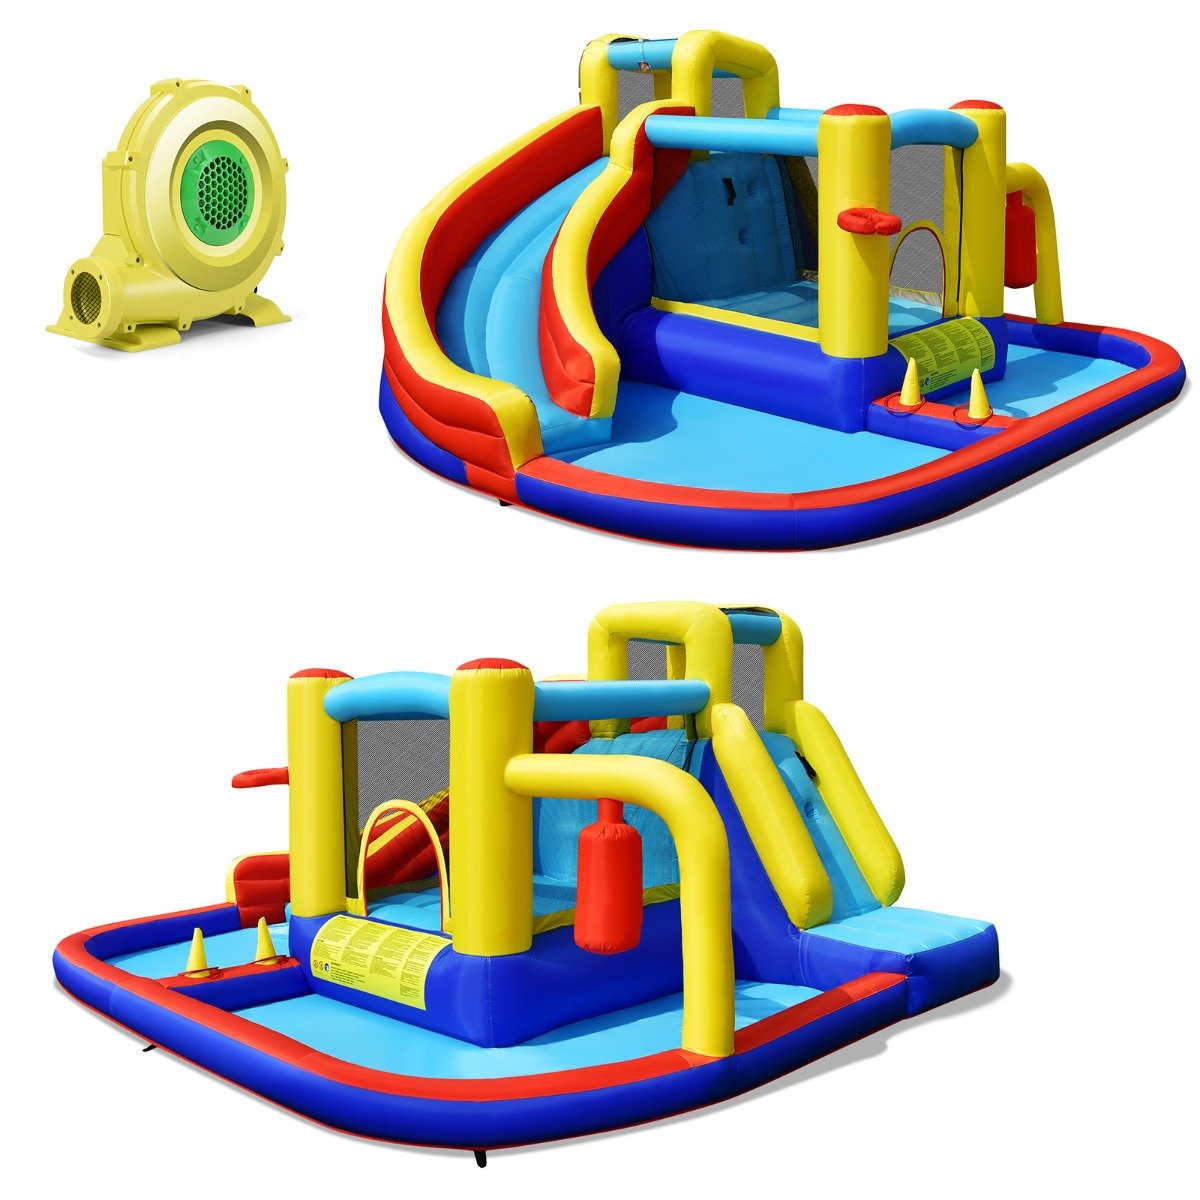 Inflatable Bounce Castle and Water Slide: The Fun Starts Here